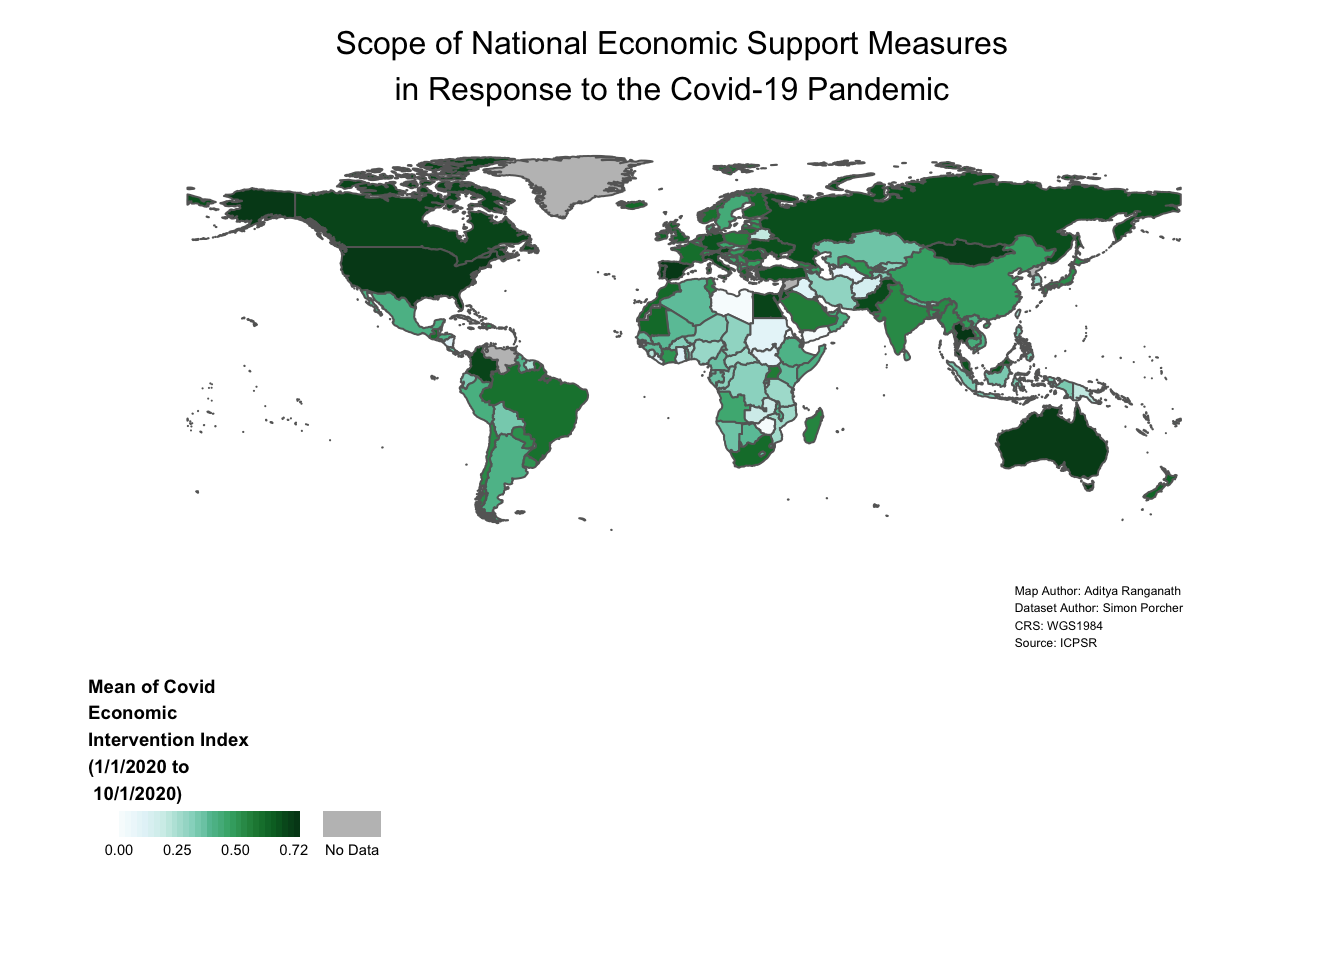 Reproduces map created in lesson and generated through summary script. Choropleth world map showing variation in country-level average of covid economic intervention index; green color scheme ranging from lighter shades of green to represent lower values of the index and darker shades of green to represent higher values; countries without data are filled in with gray The map legend is a horizontal bar that displays values using a continuous color gradient with custom-chosen numbers arrayed below the gradient to help inform the viewer about the data distribution. The legend is displayed on the bottom-left of the map below and to the left of South America and is titled 'Mean of Covid Economic Intervention Index (1/1/2020 to 10/1/2020)'; the legend title is in bold and placed over the horizontal legend bar. There is no map frame surrounding the map. The map's title is 'Scope of National Economic Support Measures in Response to the Covid-19 Pandemic', which is split into two lines and centered at the top of the map above the northern-most countries. The map map credits are split across four lines, and printed on the bottom-right of the map below Australia and New Zealand. 